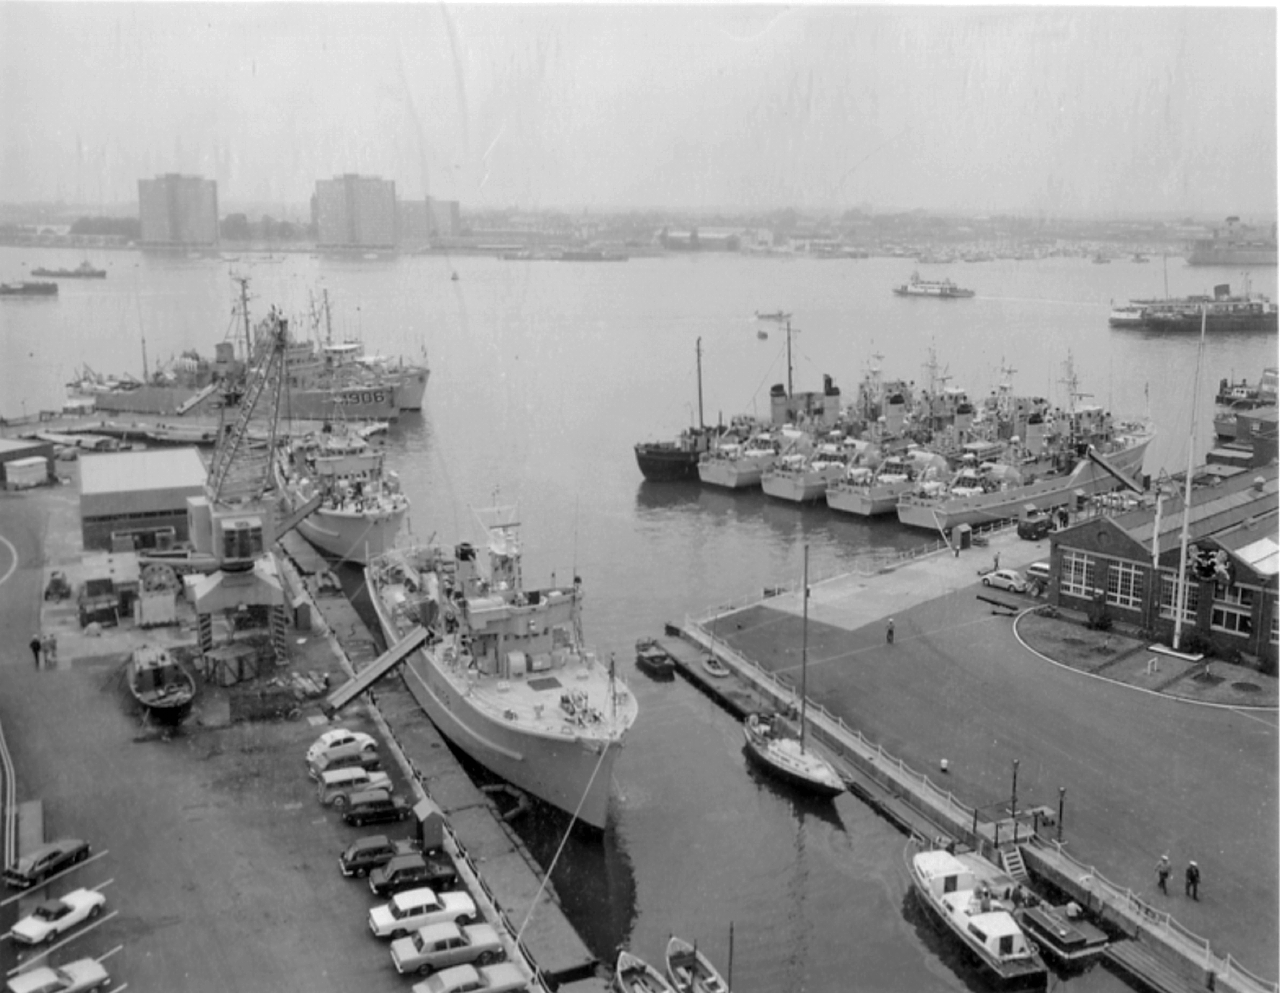 HMS VERNON's diving training tender HMS Laleston with RN, RNR and NATO Mine Countermeasures vessels berthed at HMS VERNON in 1974